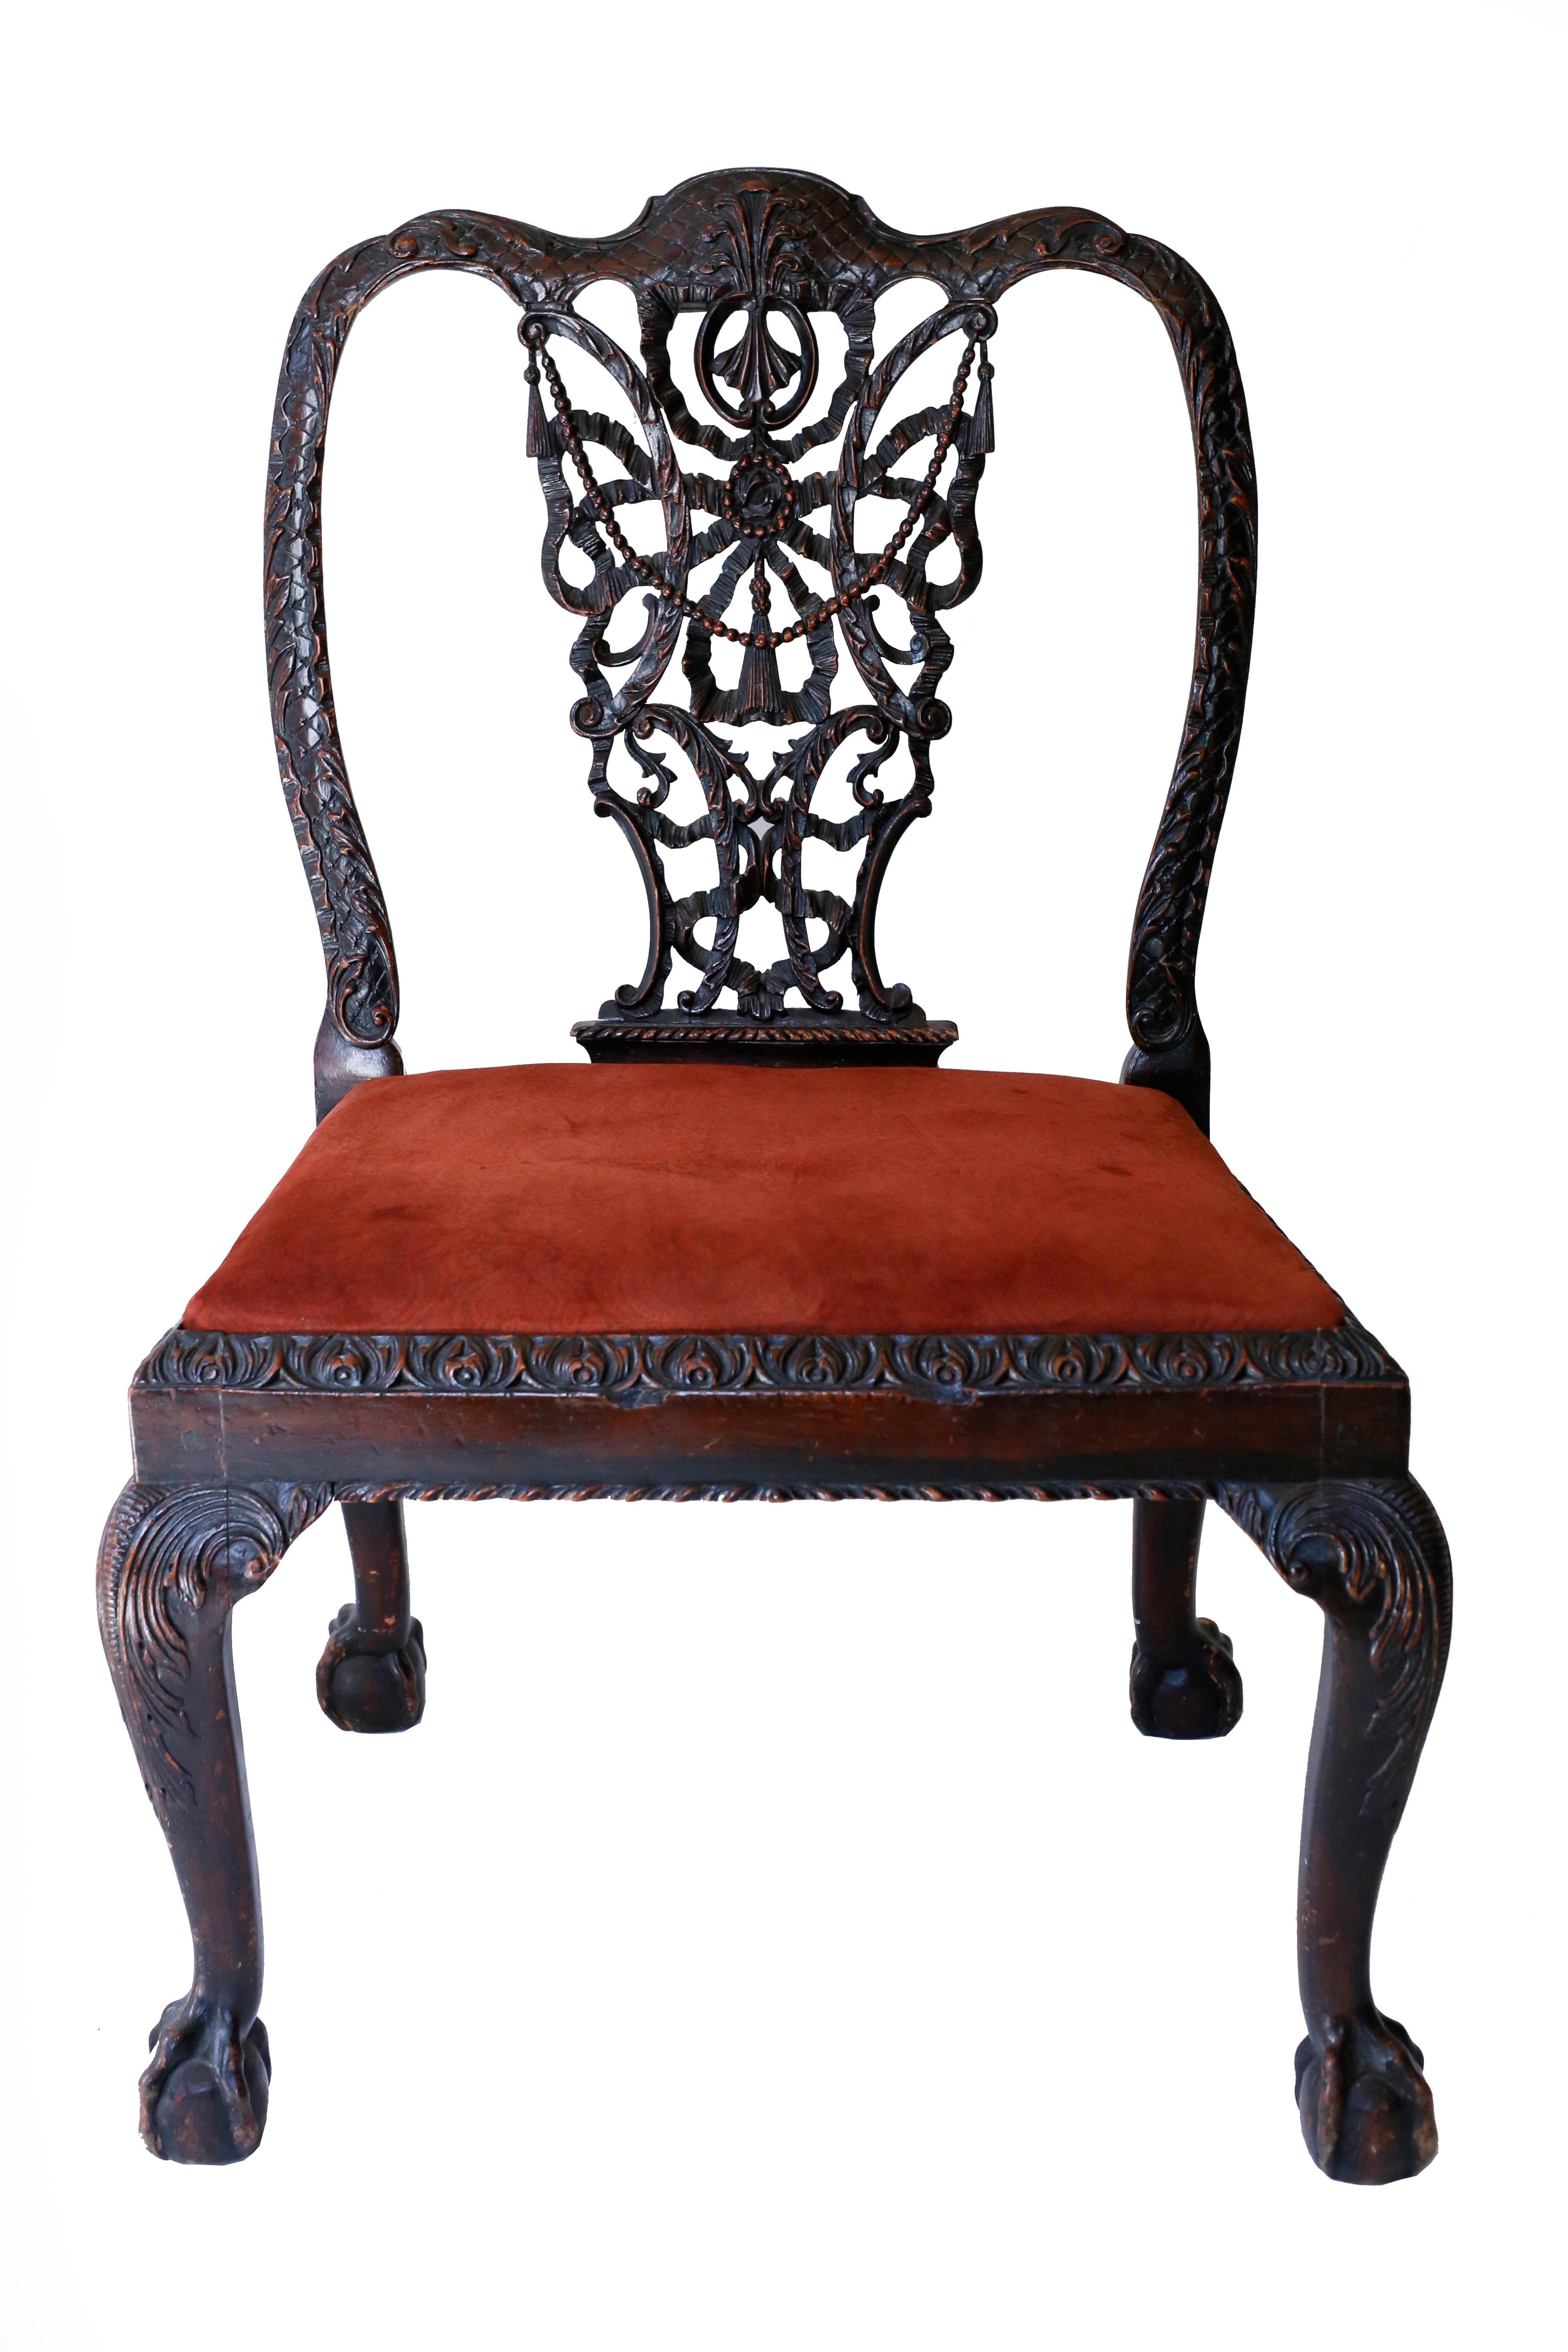 A exuberantly carved pair of intricate pierced splat chairs rooted in the designs of Thomas Chippendale for a 